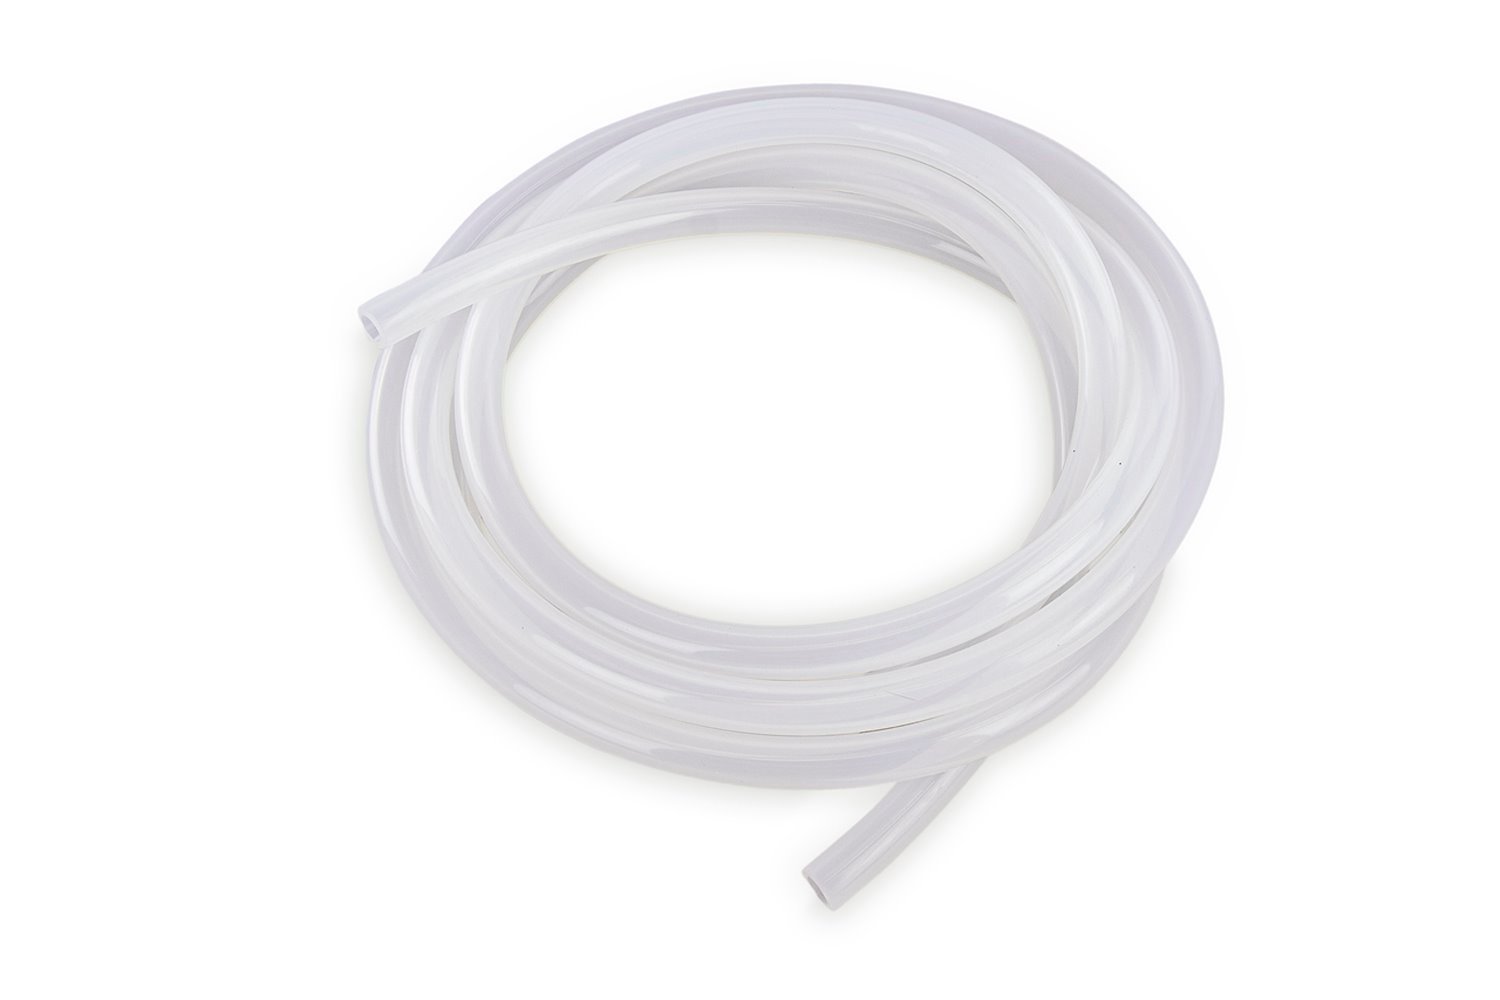 HTSVH5-CLEARx5 High-Temperature Silicone Vacuum Hose Tubing, 13/64 in. ID, 5 ft. Roll, Clear